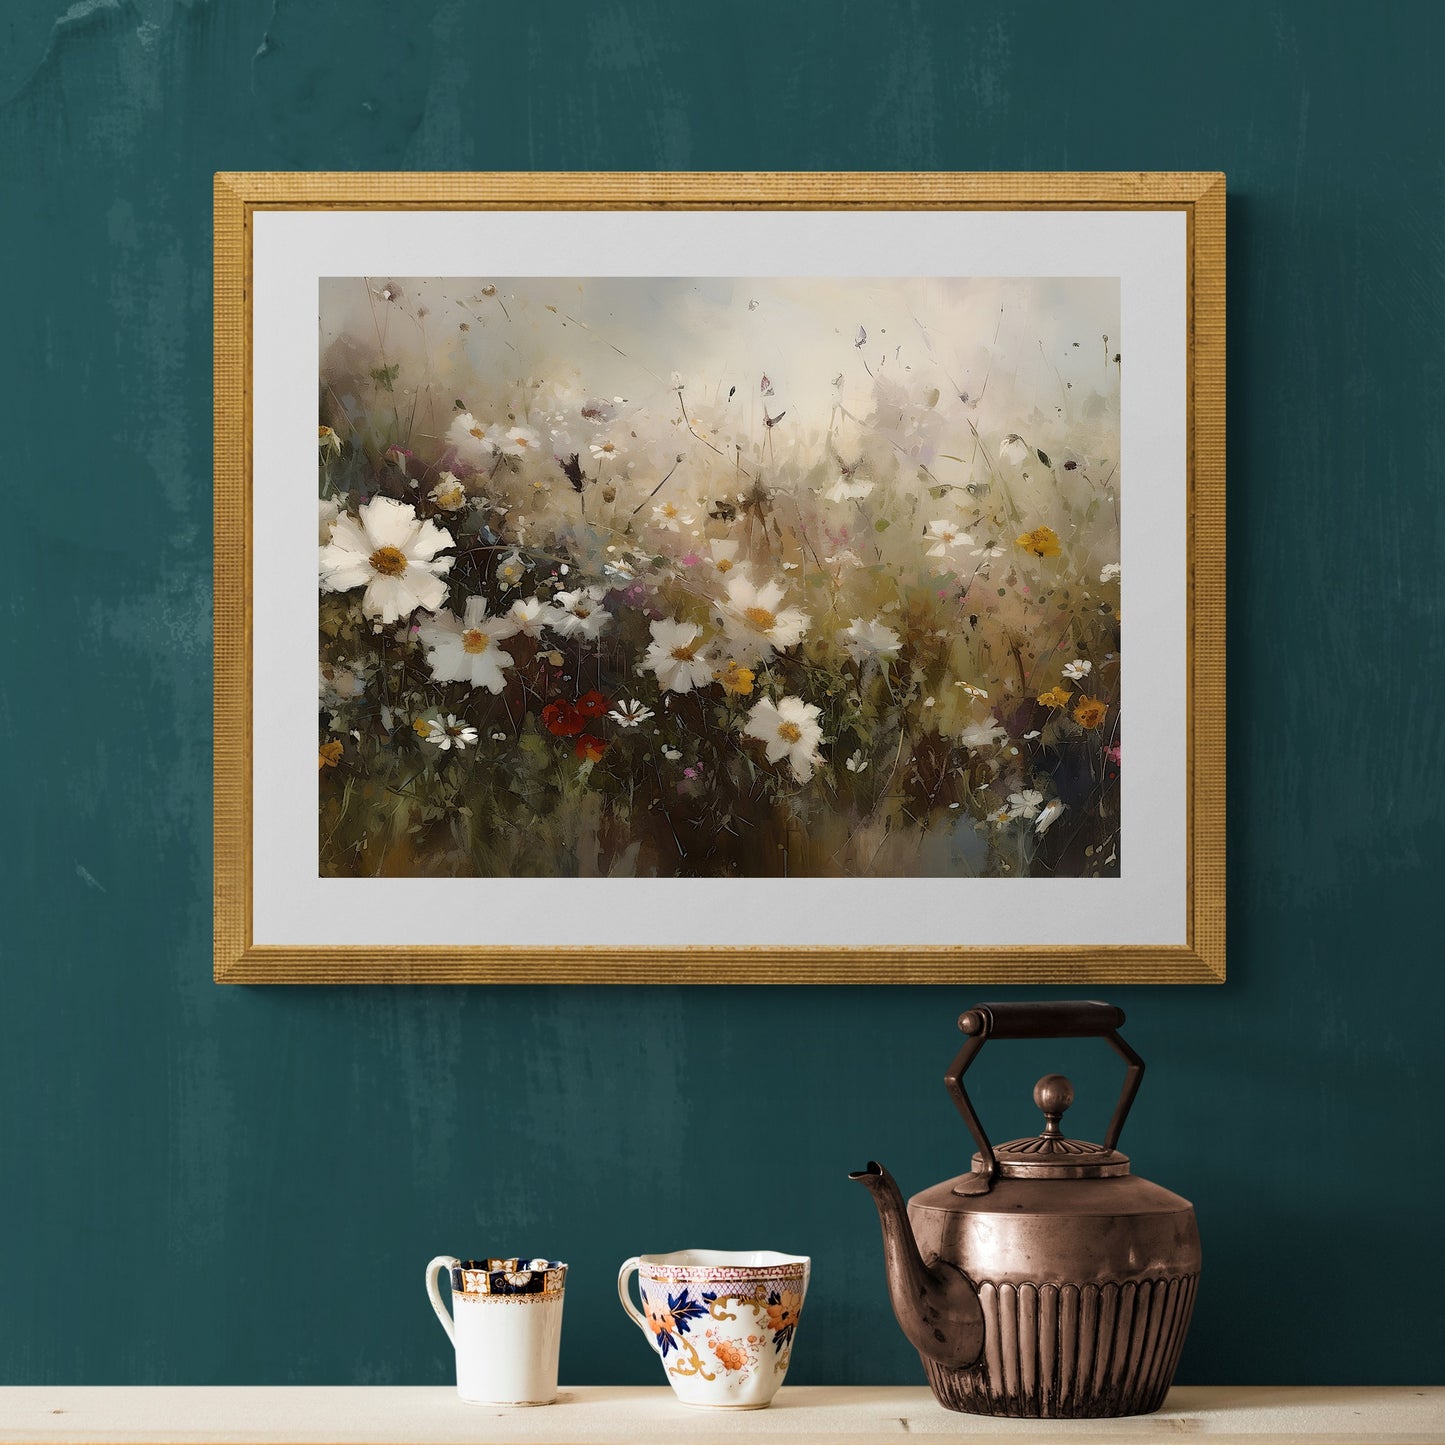 Vivid Wildflower Meadow Art Paper Poster Prints Modern Impressionistic Oil Painting, Bottom View Perspective, Detailed Flower Portrait Wall Decor